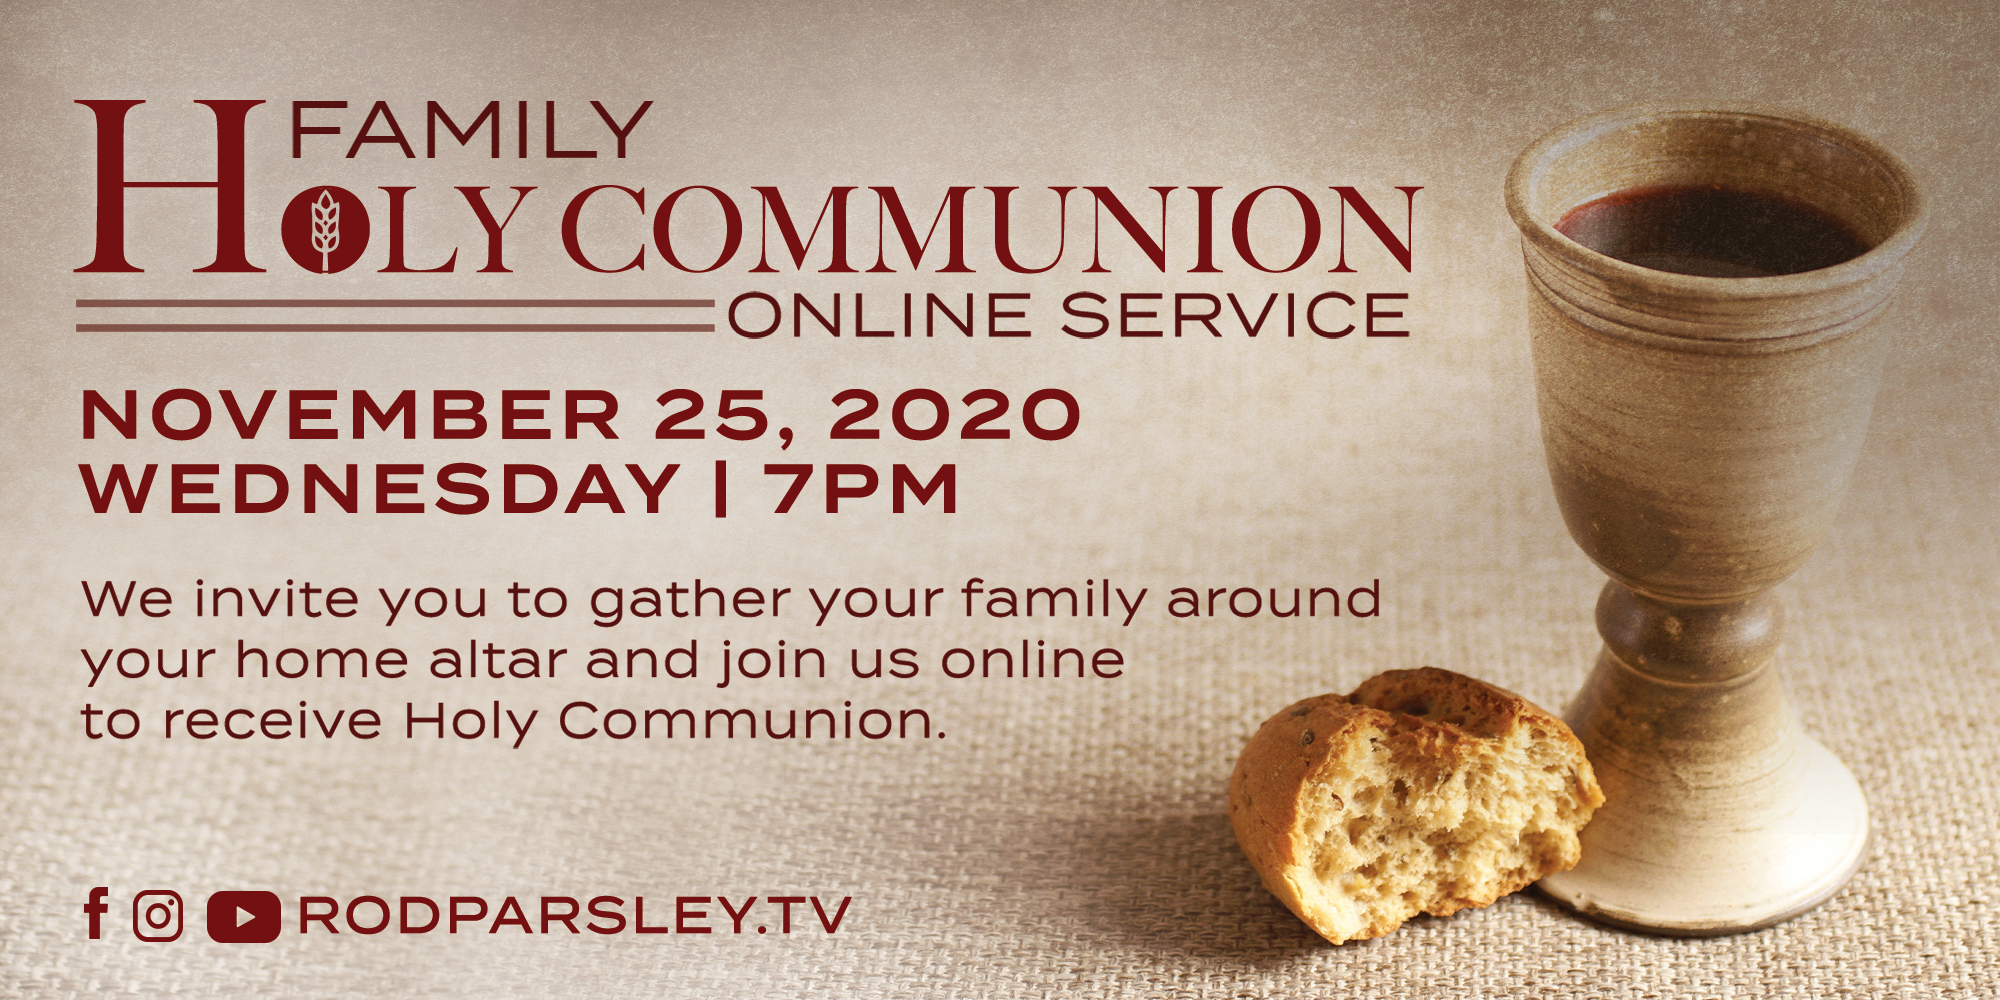 Join us Online for Holy Communion November 25th at 7PM